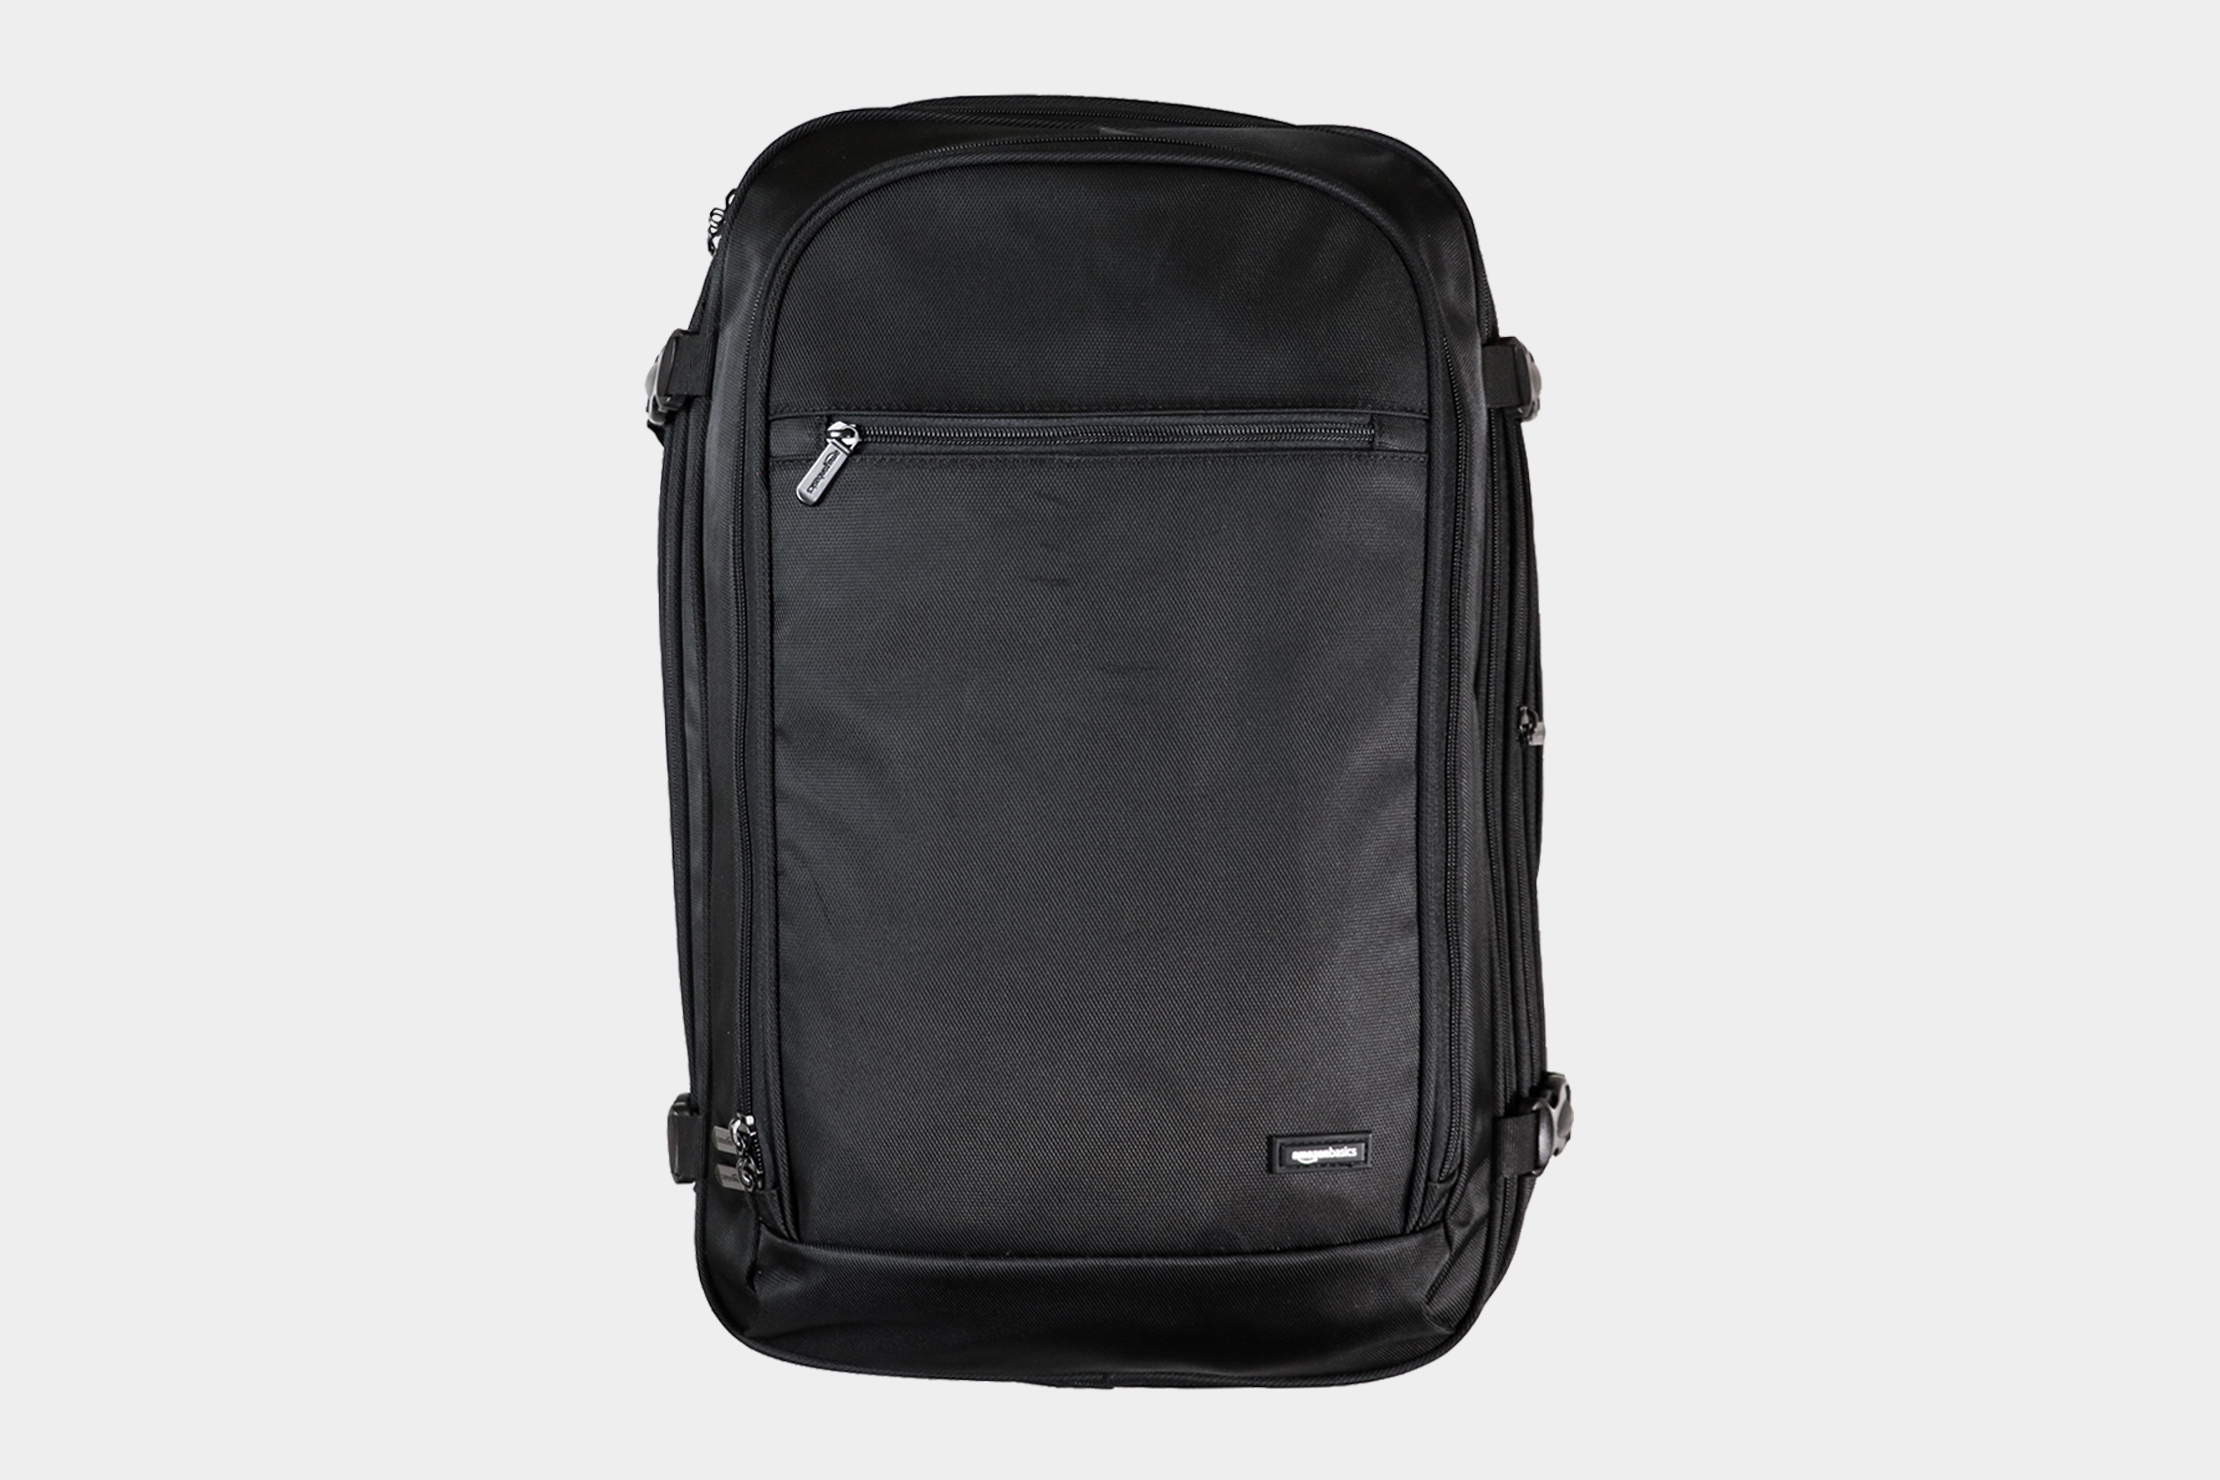 AmazonBasics Carry-On Backpack | 6.1/10 | Pack